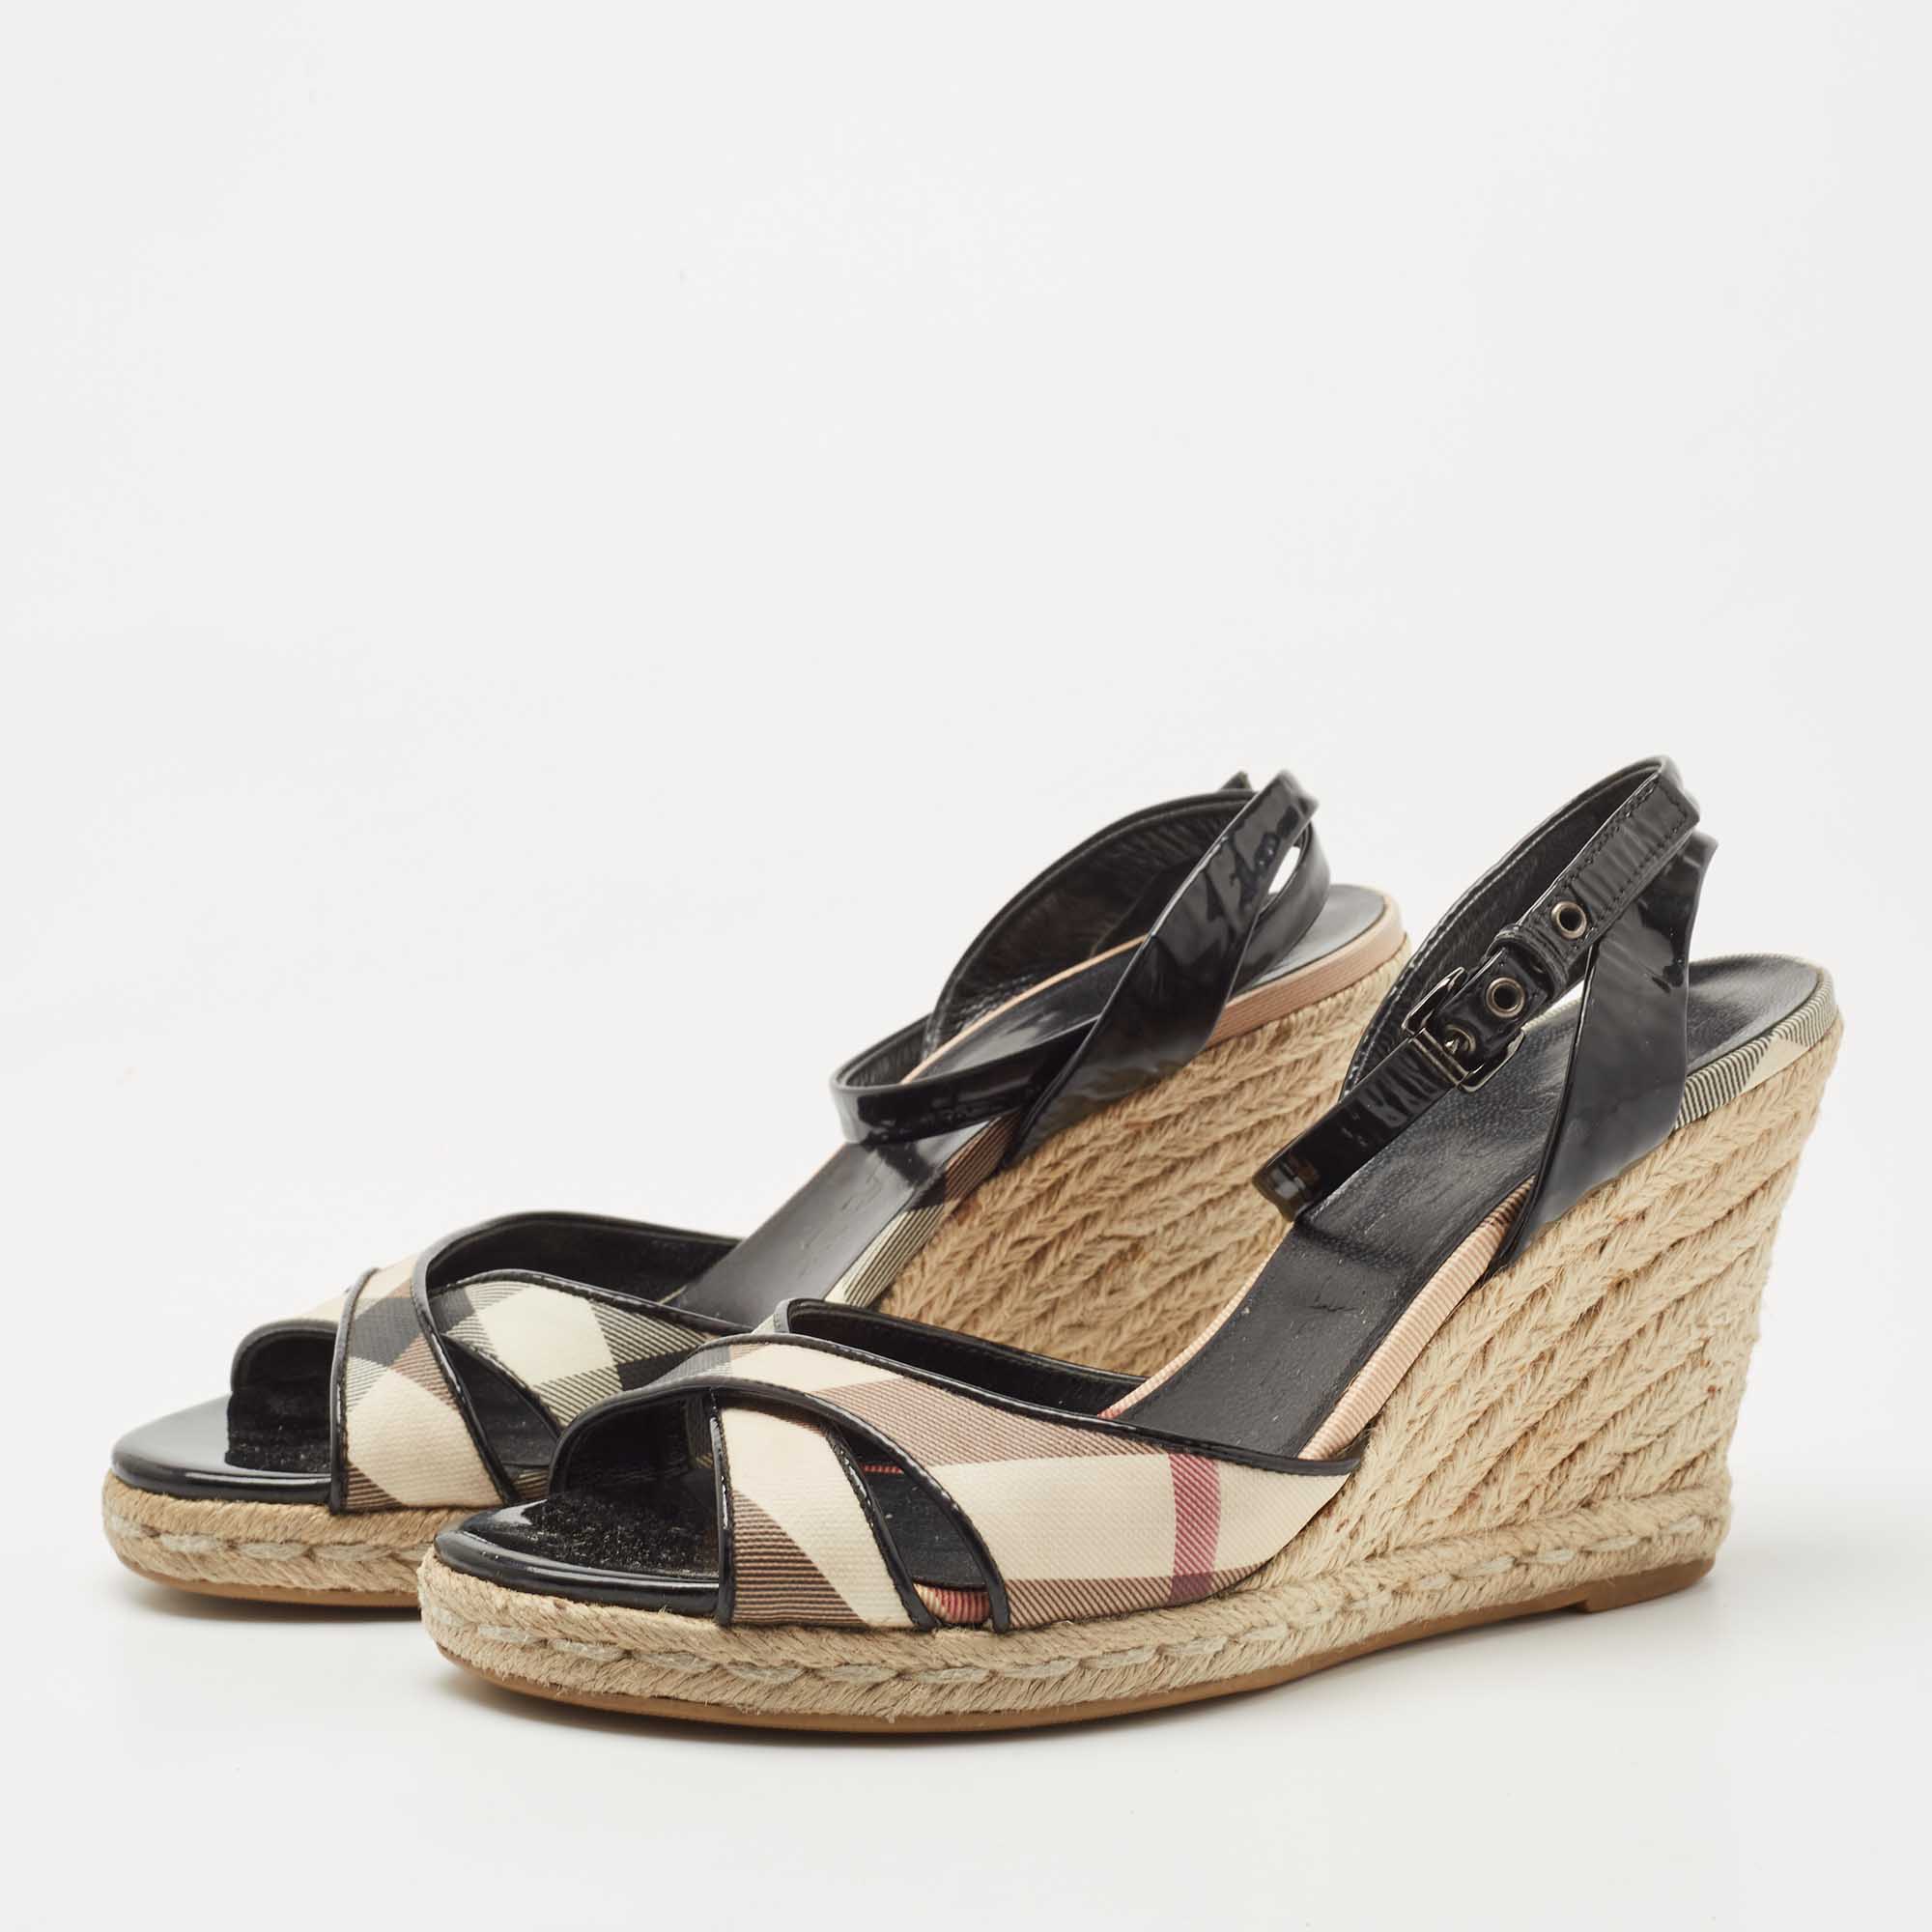 

Burberry Black/Beige House Check Leather Espadrilles Wedges Sandals Size